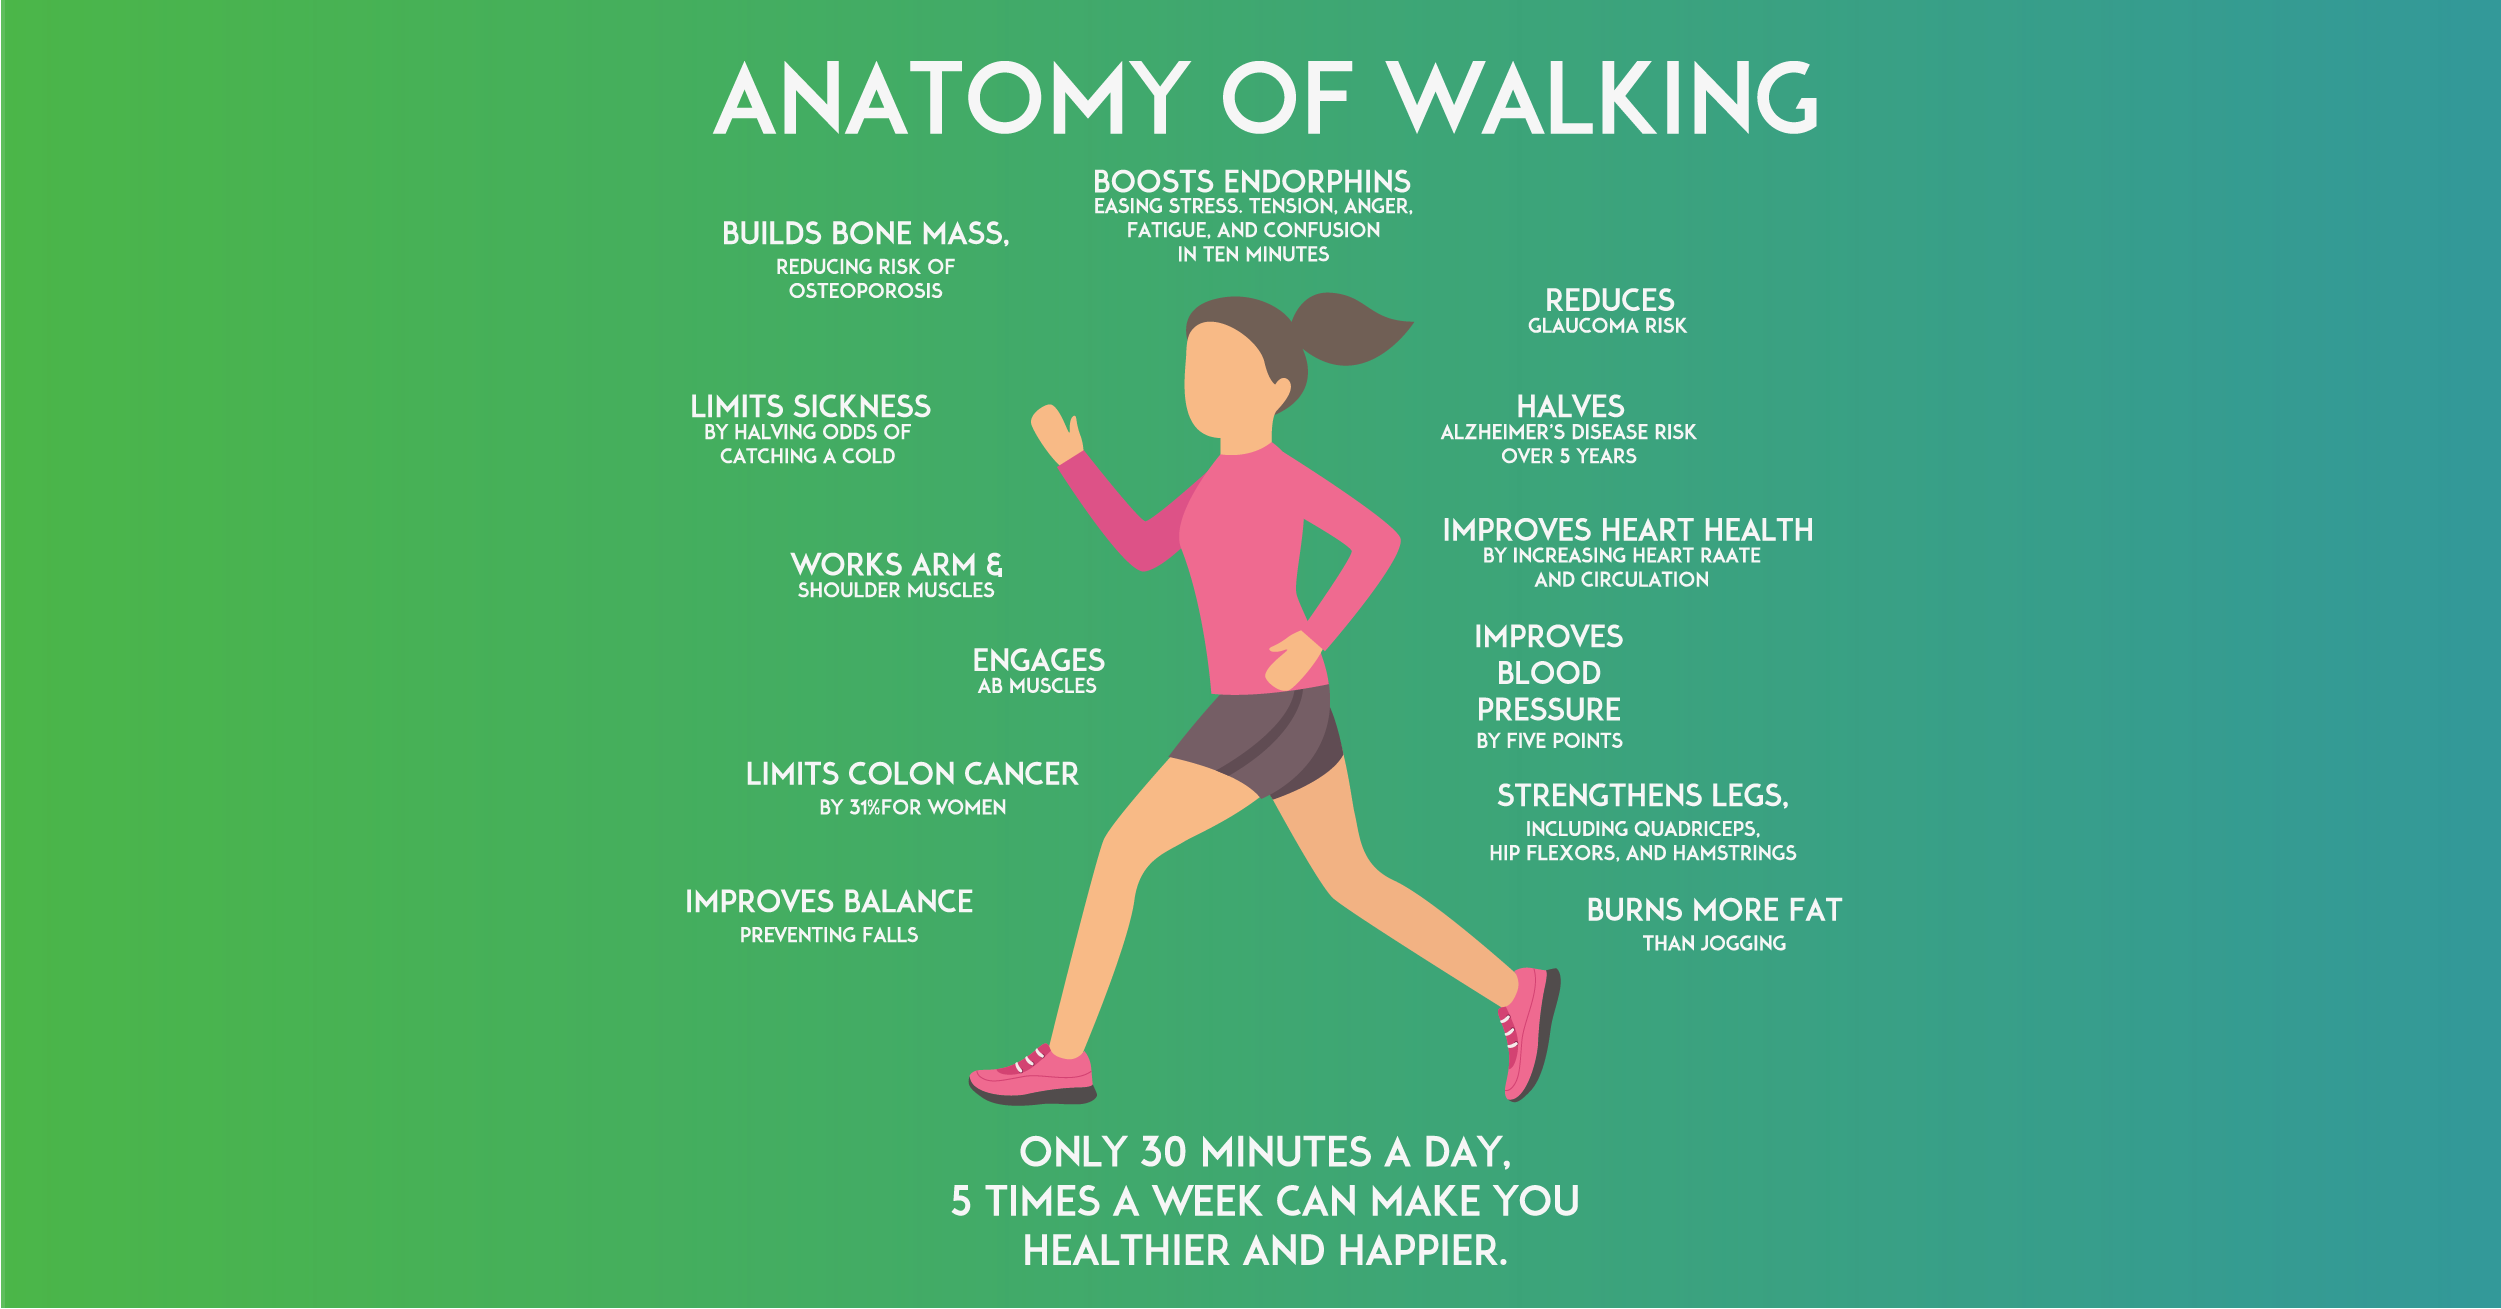 Is Walking Or Running Better For Weight Loss? (10+ Studies) – Fitbod